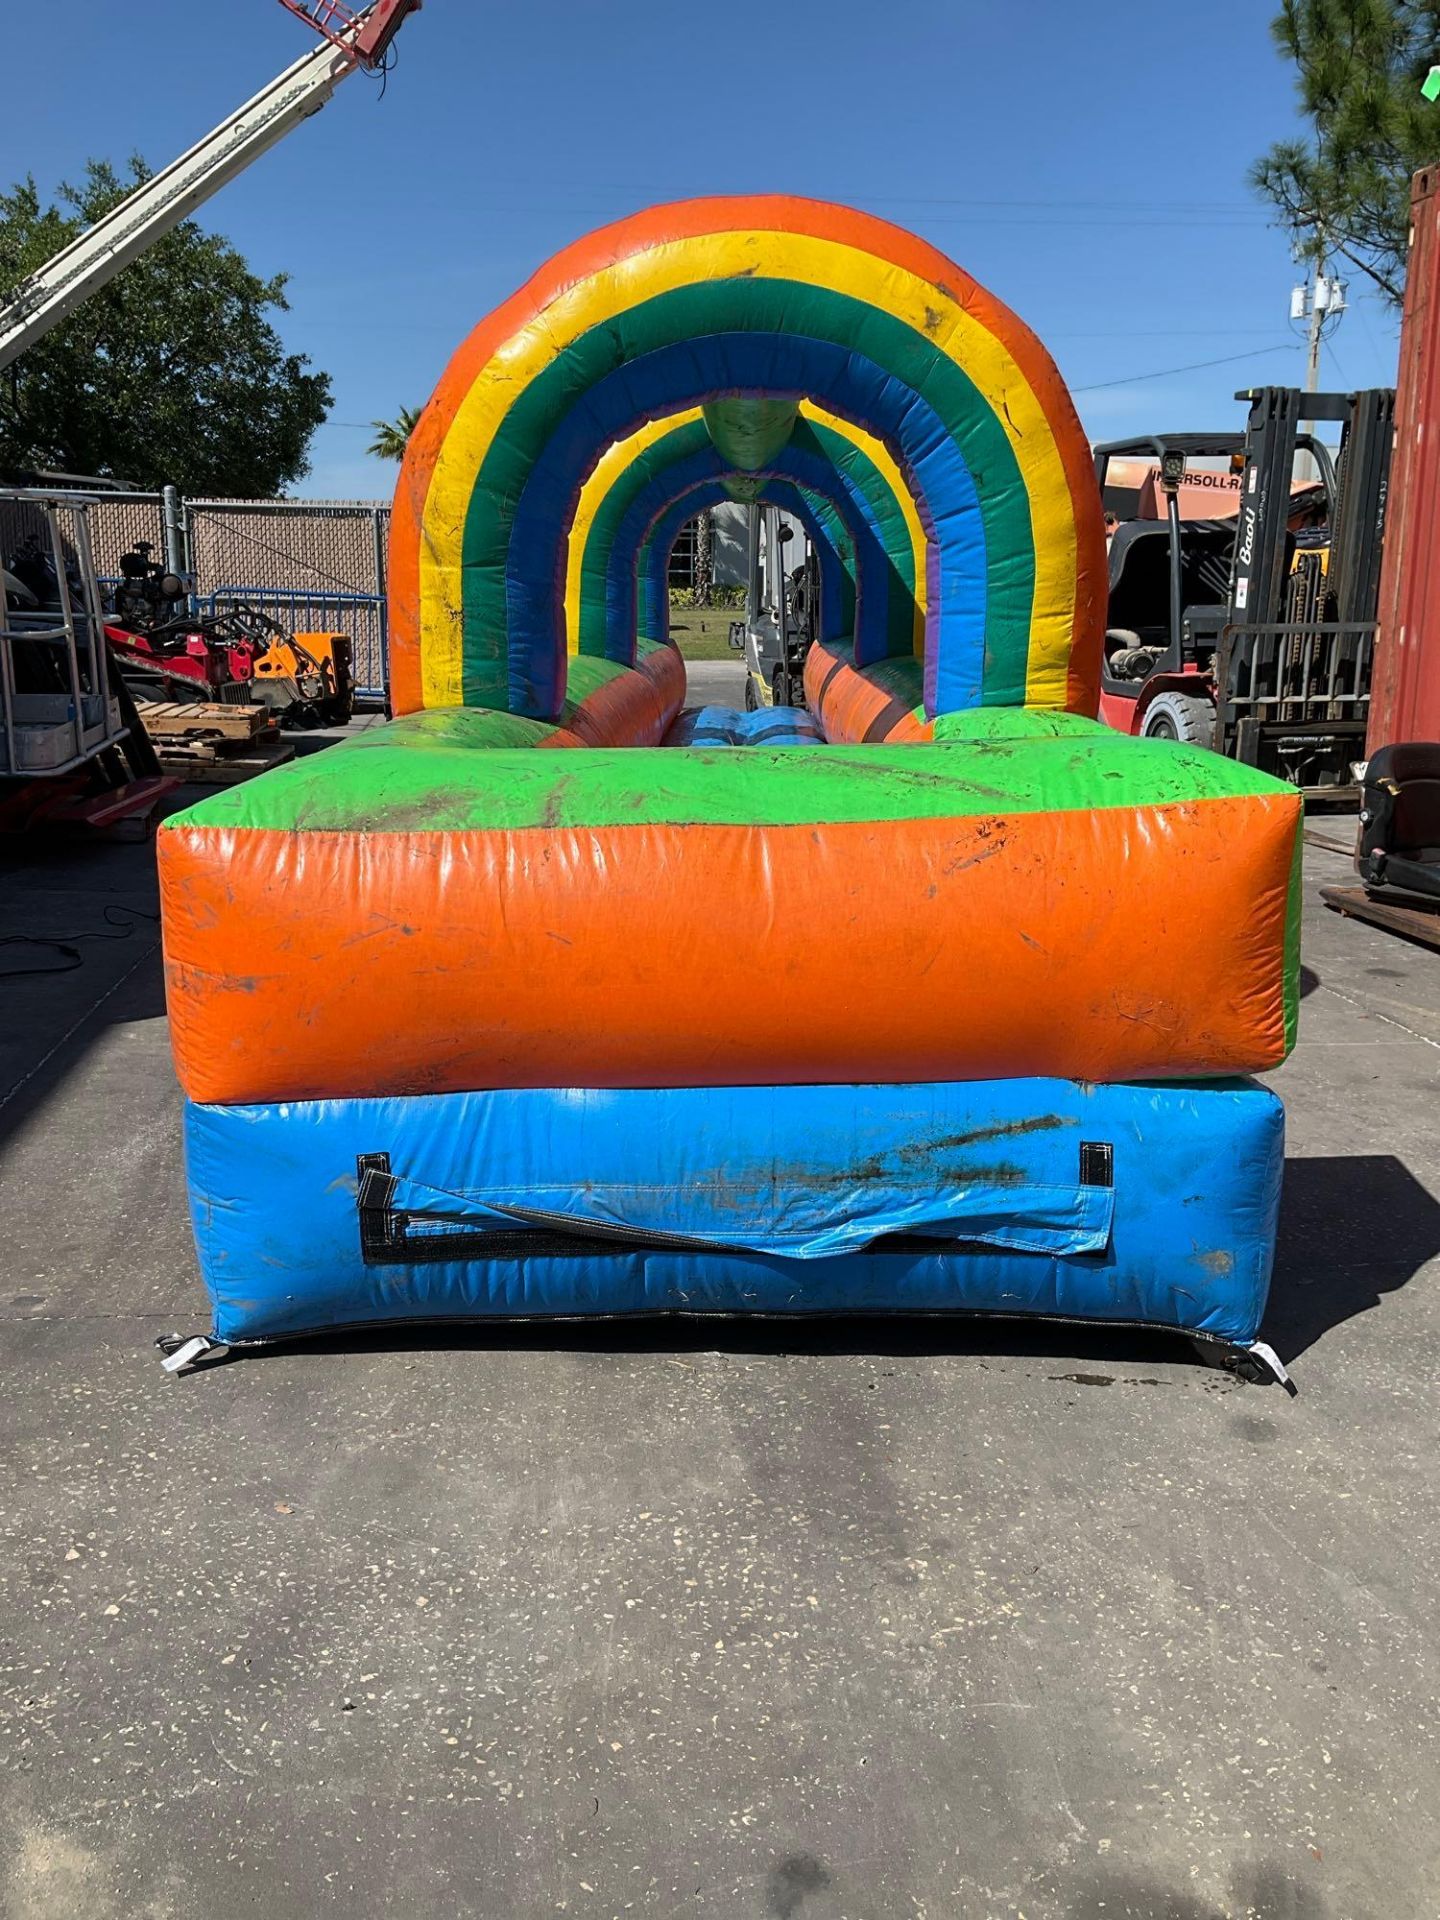 RAINBOW 25FT SLIP -N-SLIDE BOUNCE HOUSE WITH BLOWER - Image 5 of 11